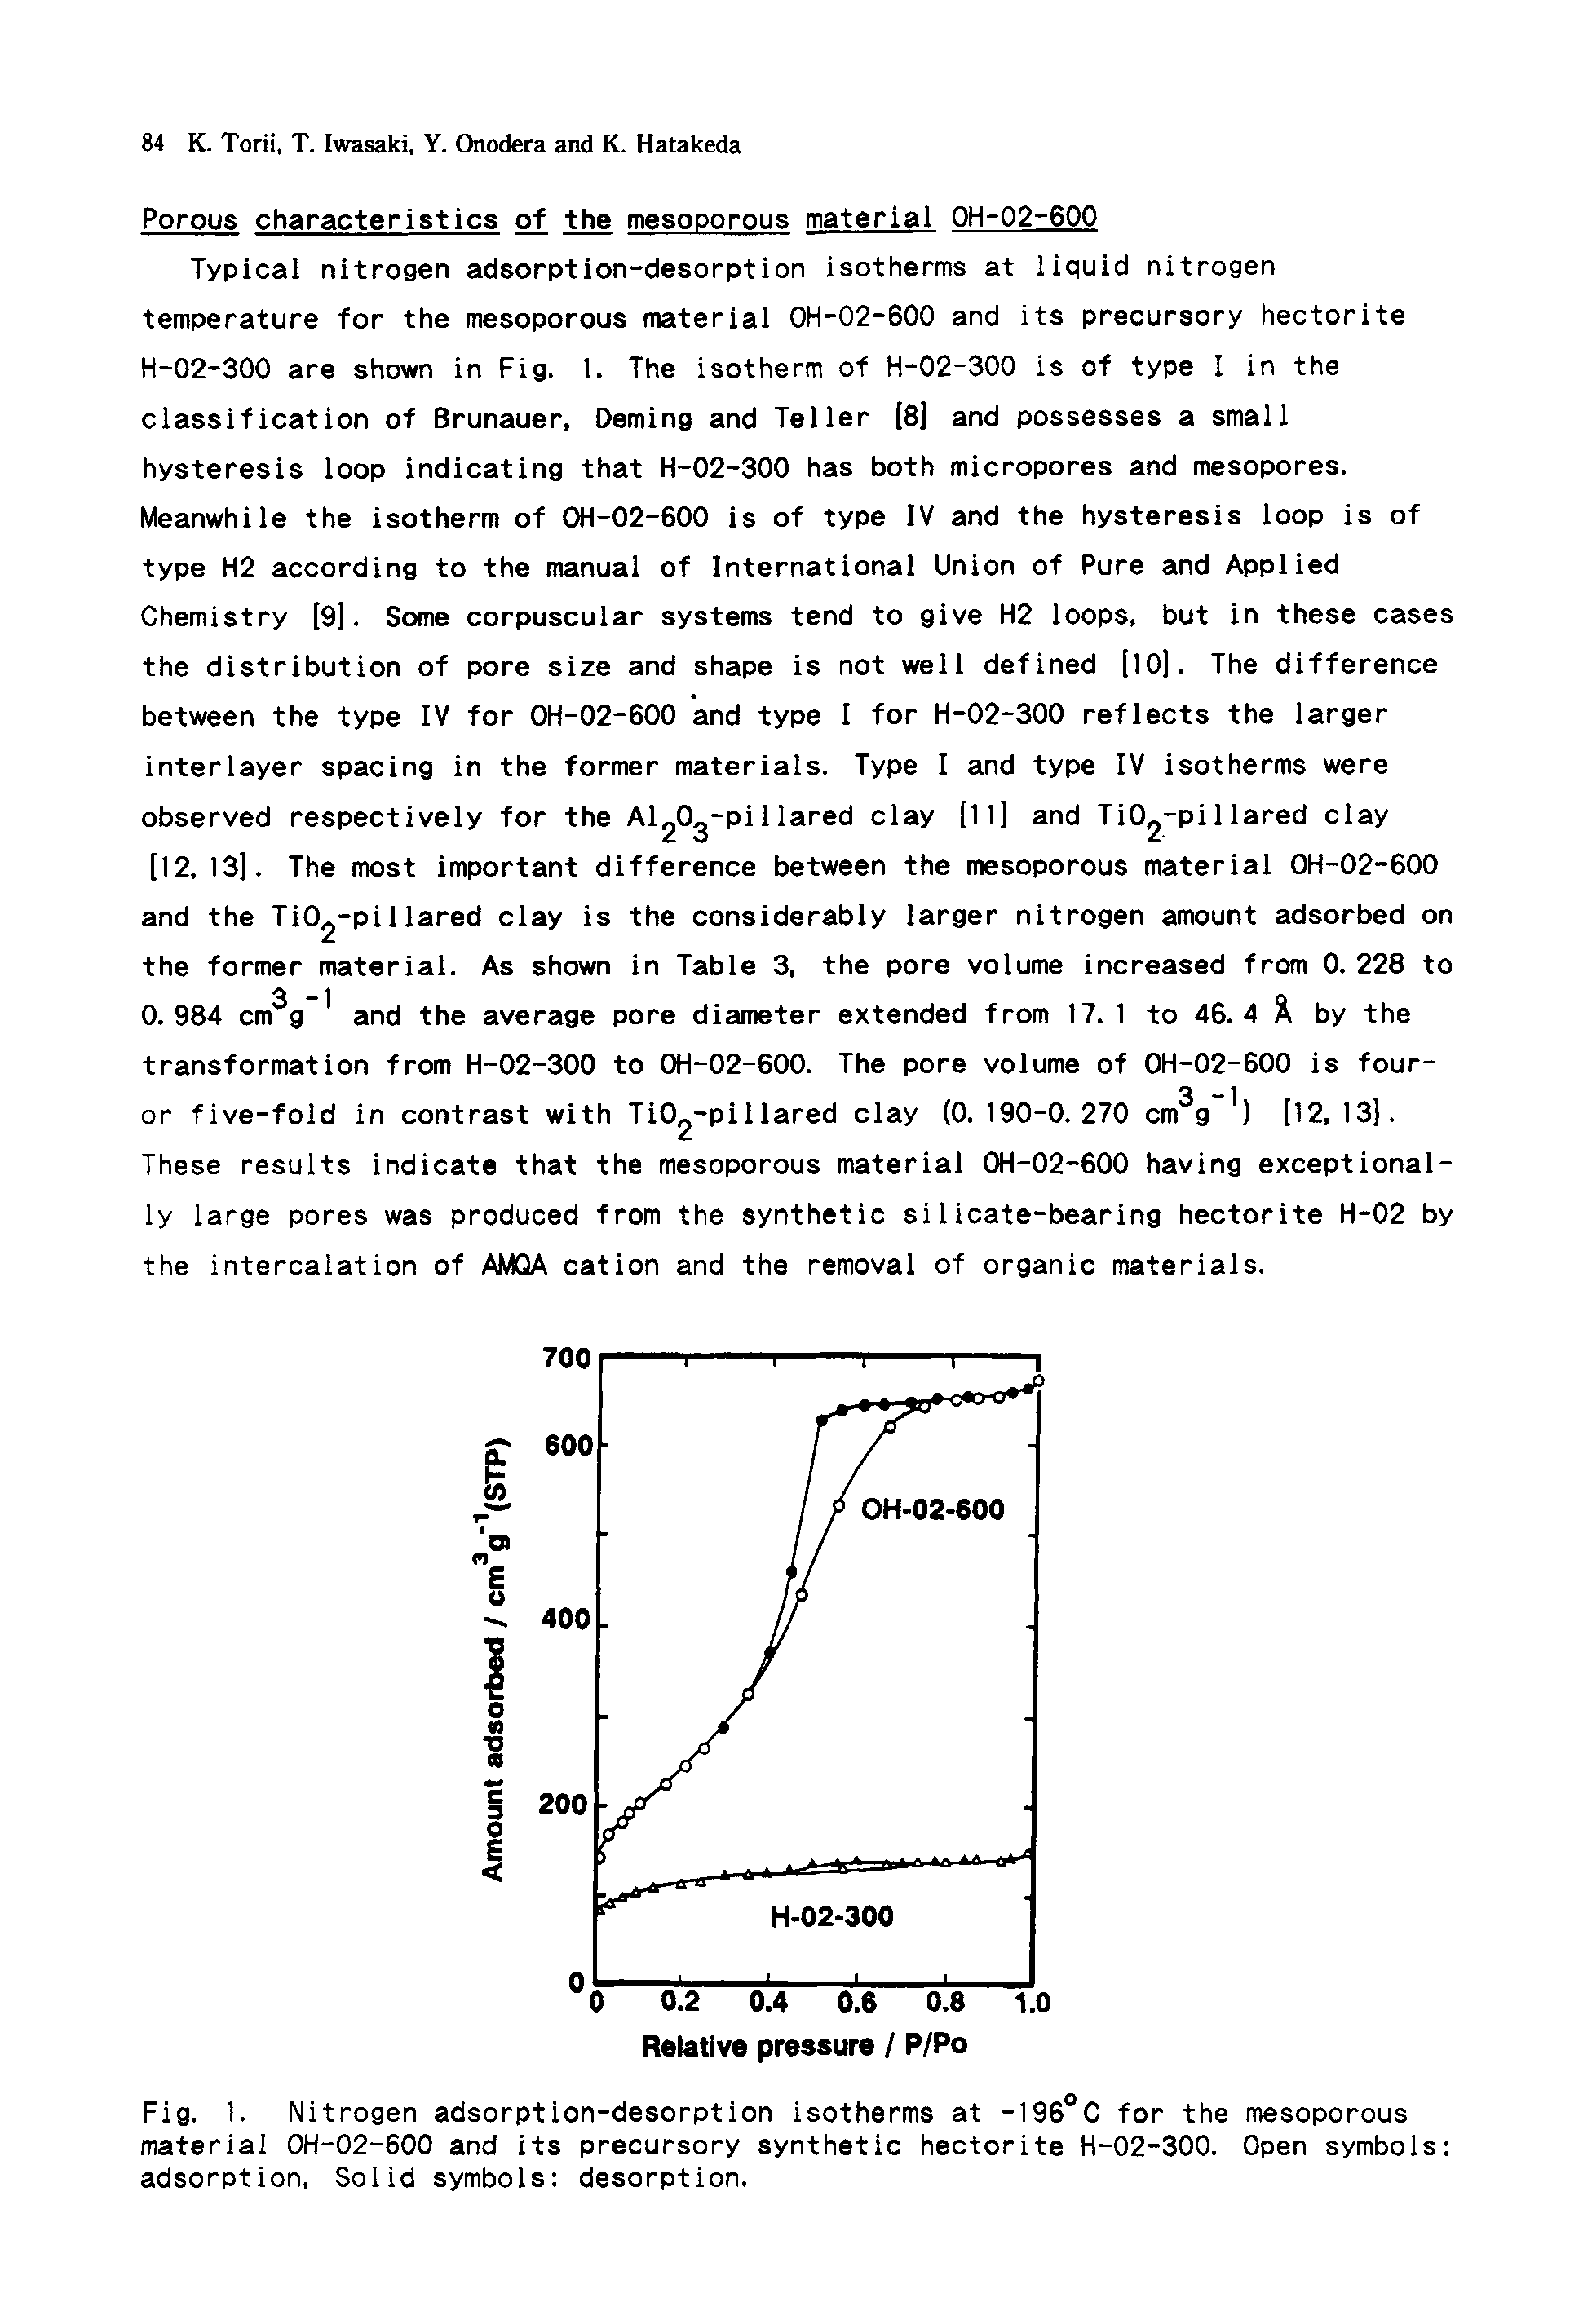 Fig. 1. Nitrogen adsorption-desorption isotherms at -196 C for the mesoporous material OH-02-600 and its precursory synthetic hectorite H-02-300. Open symbols adsorption. Solid symbols desorption.